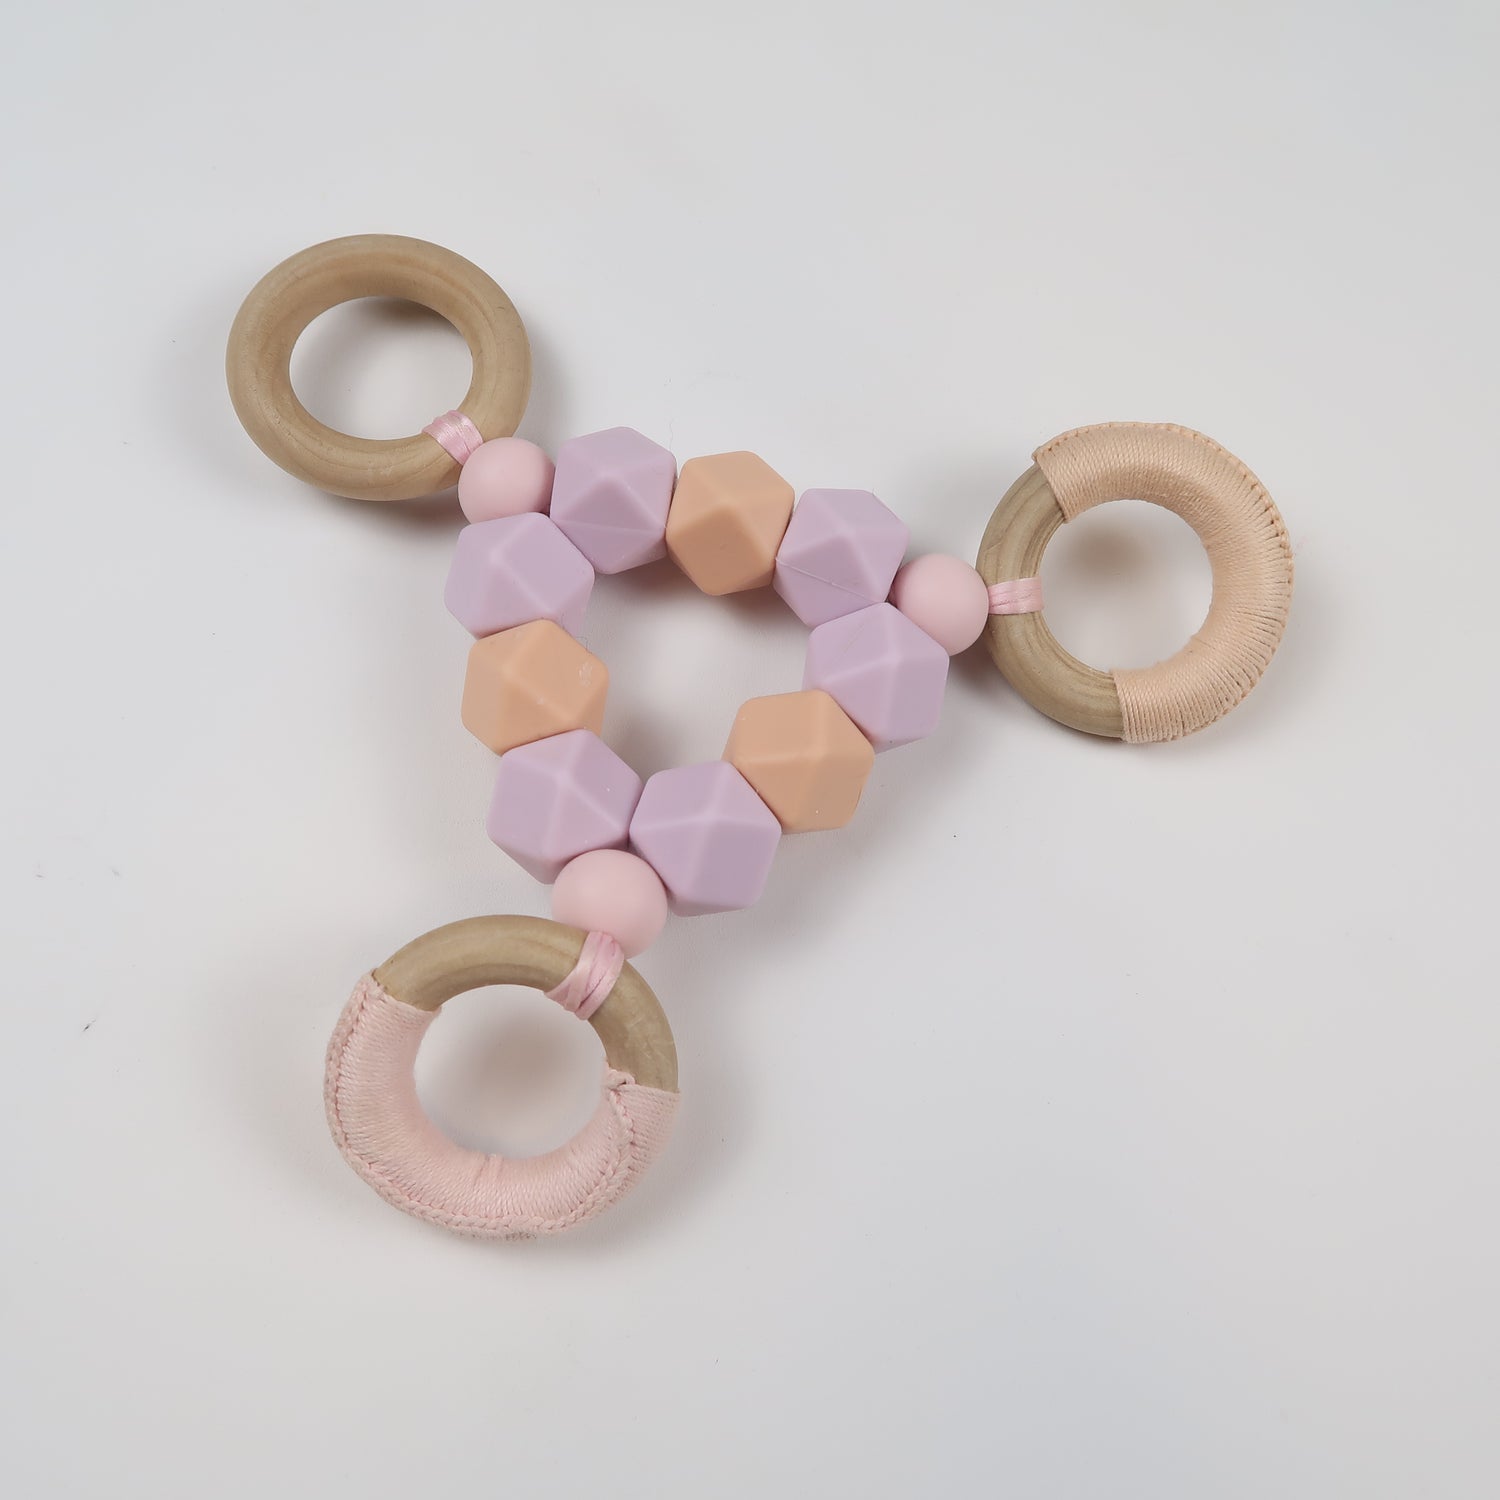 Unknown Brand - Teether/Toy